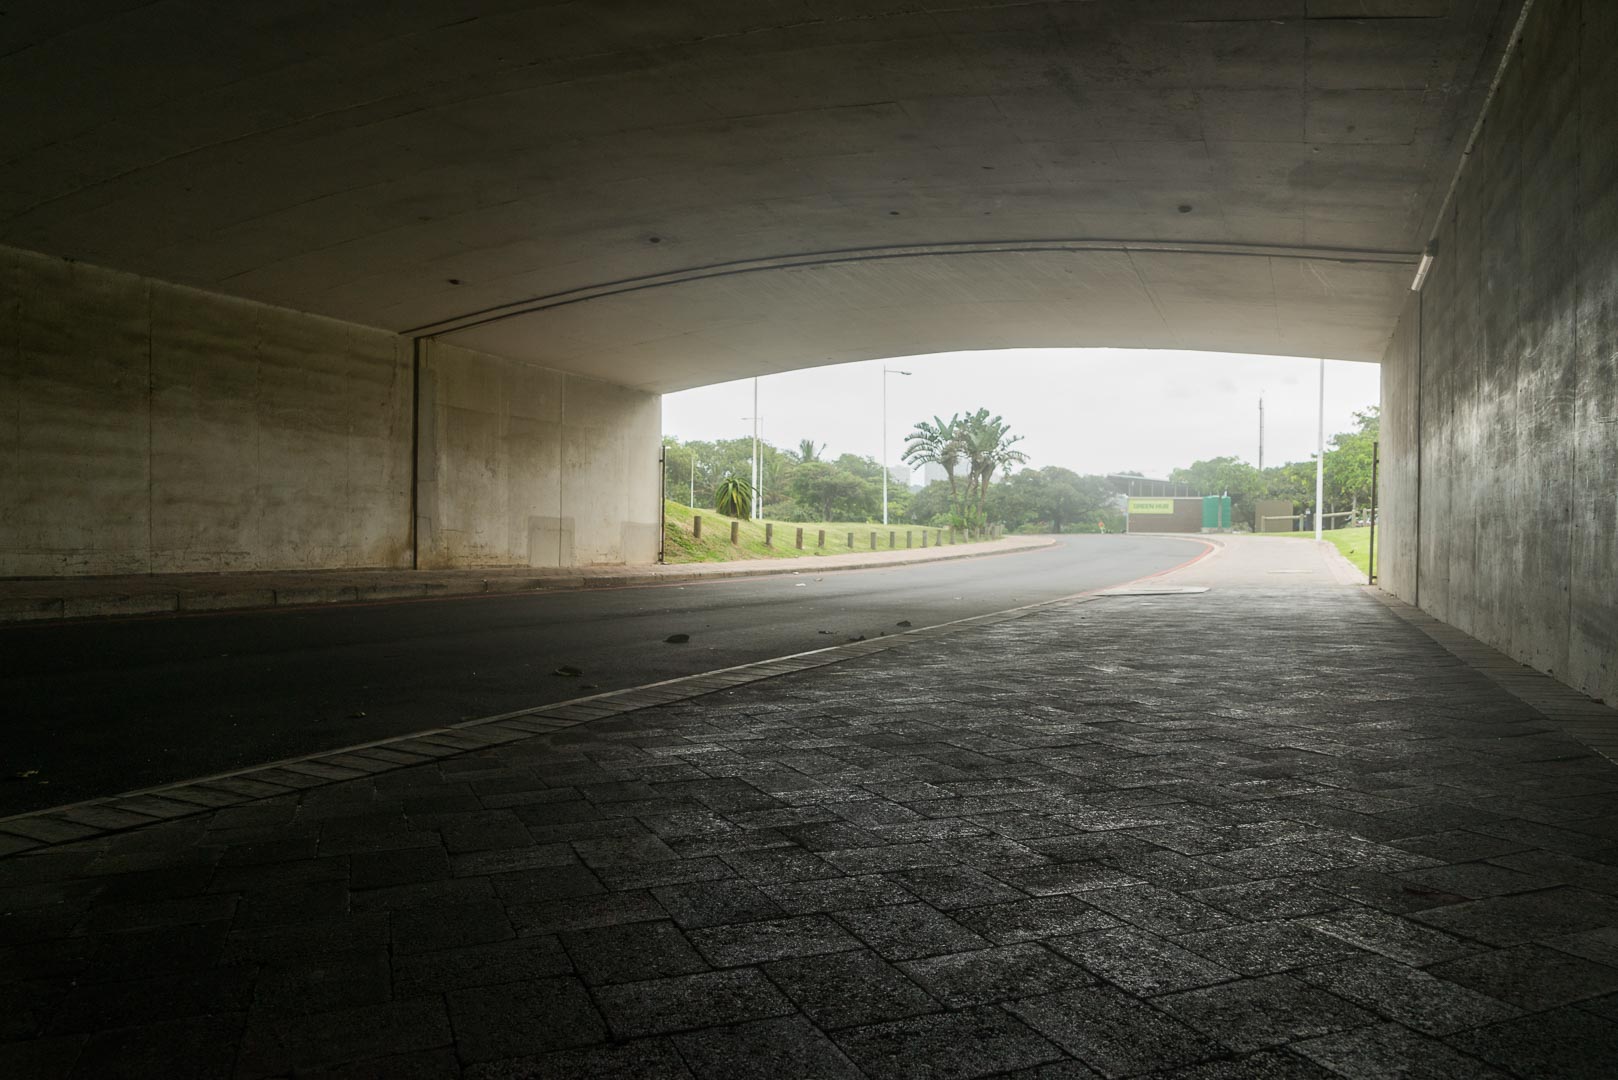 Backplate • ID: 6398 • HDRI Haven - Road Underpass